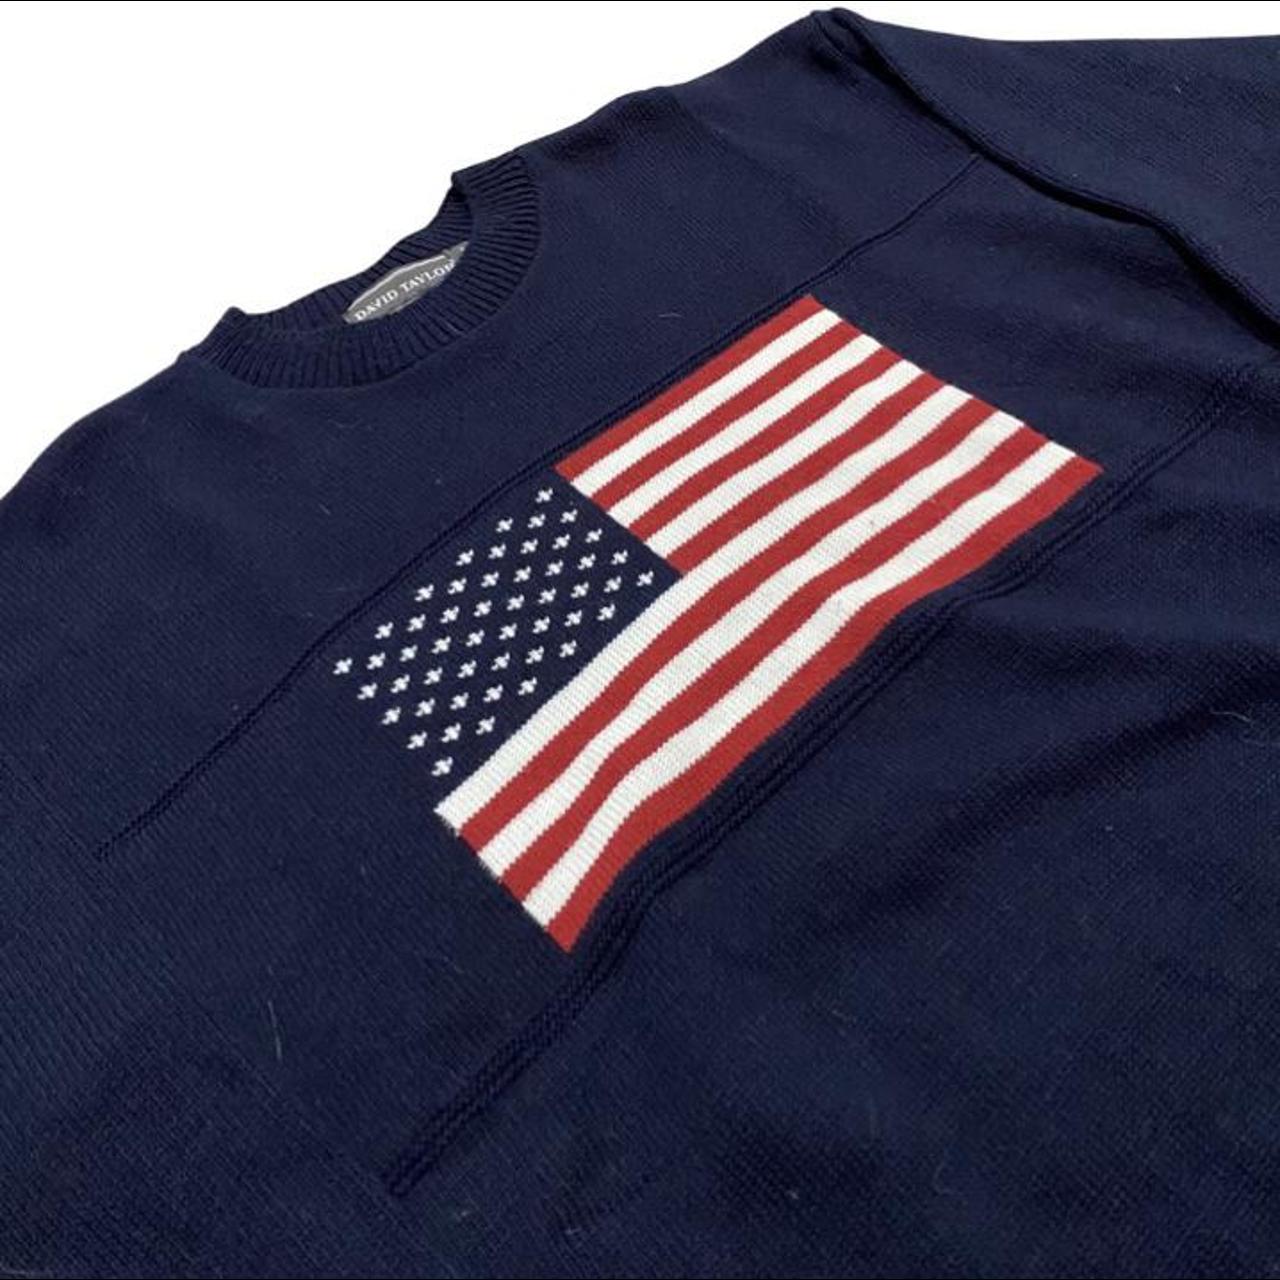 VINTAGE 90S MADE IN USA AMERICAN FLAG ACRYLIC KNIT... - Depop